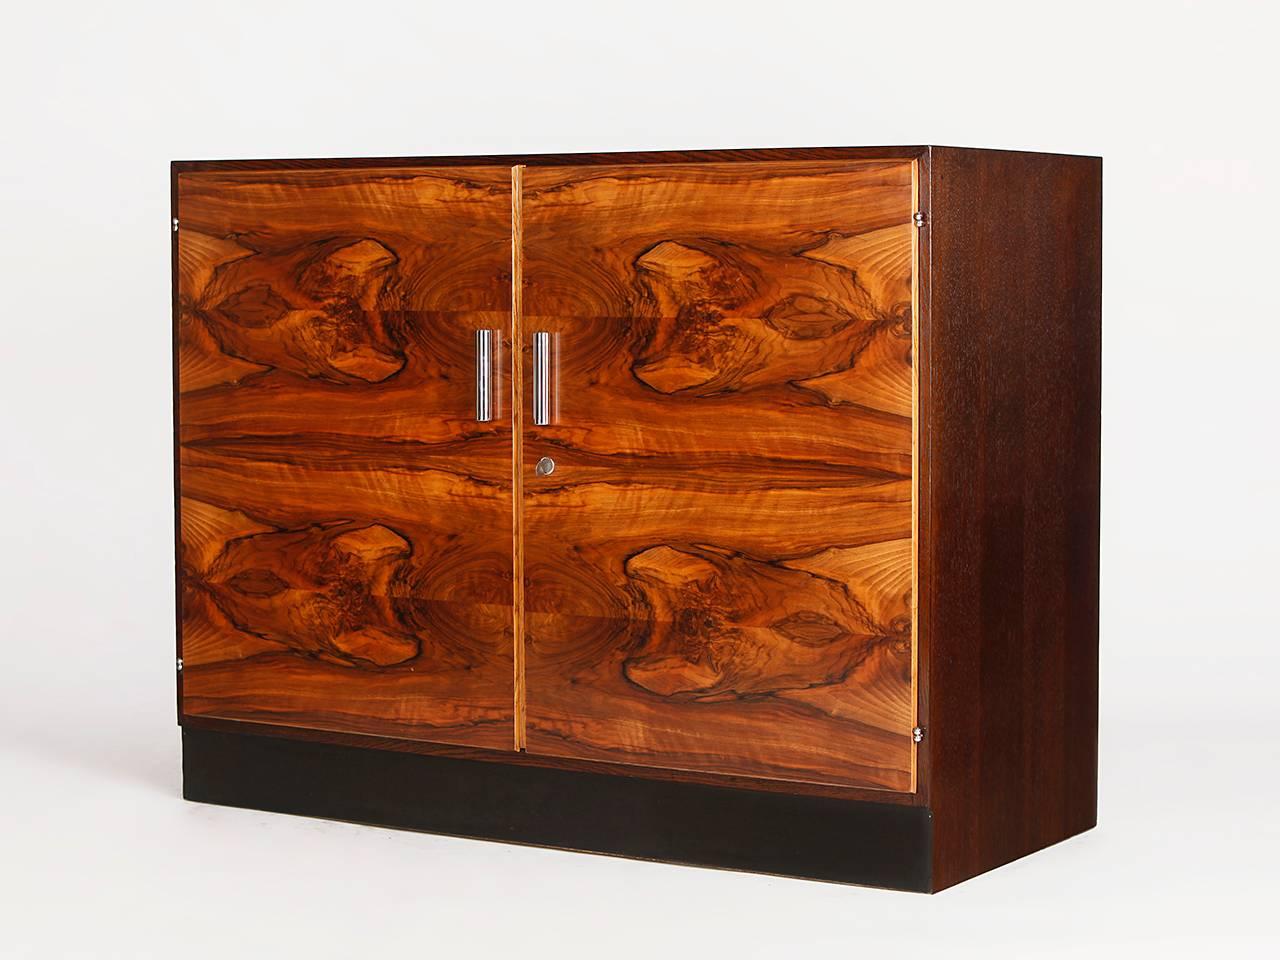 Designed by Jindrich Halabala in the 1930s. Made in the former Czechoslovakia by UP Závody. Corpus of stained oak. Doors veneered with Caucasian walnut. 
Partly restored, very nice vintage condition.

 